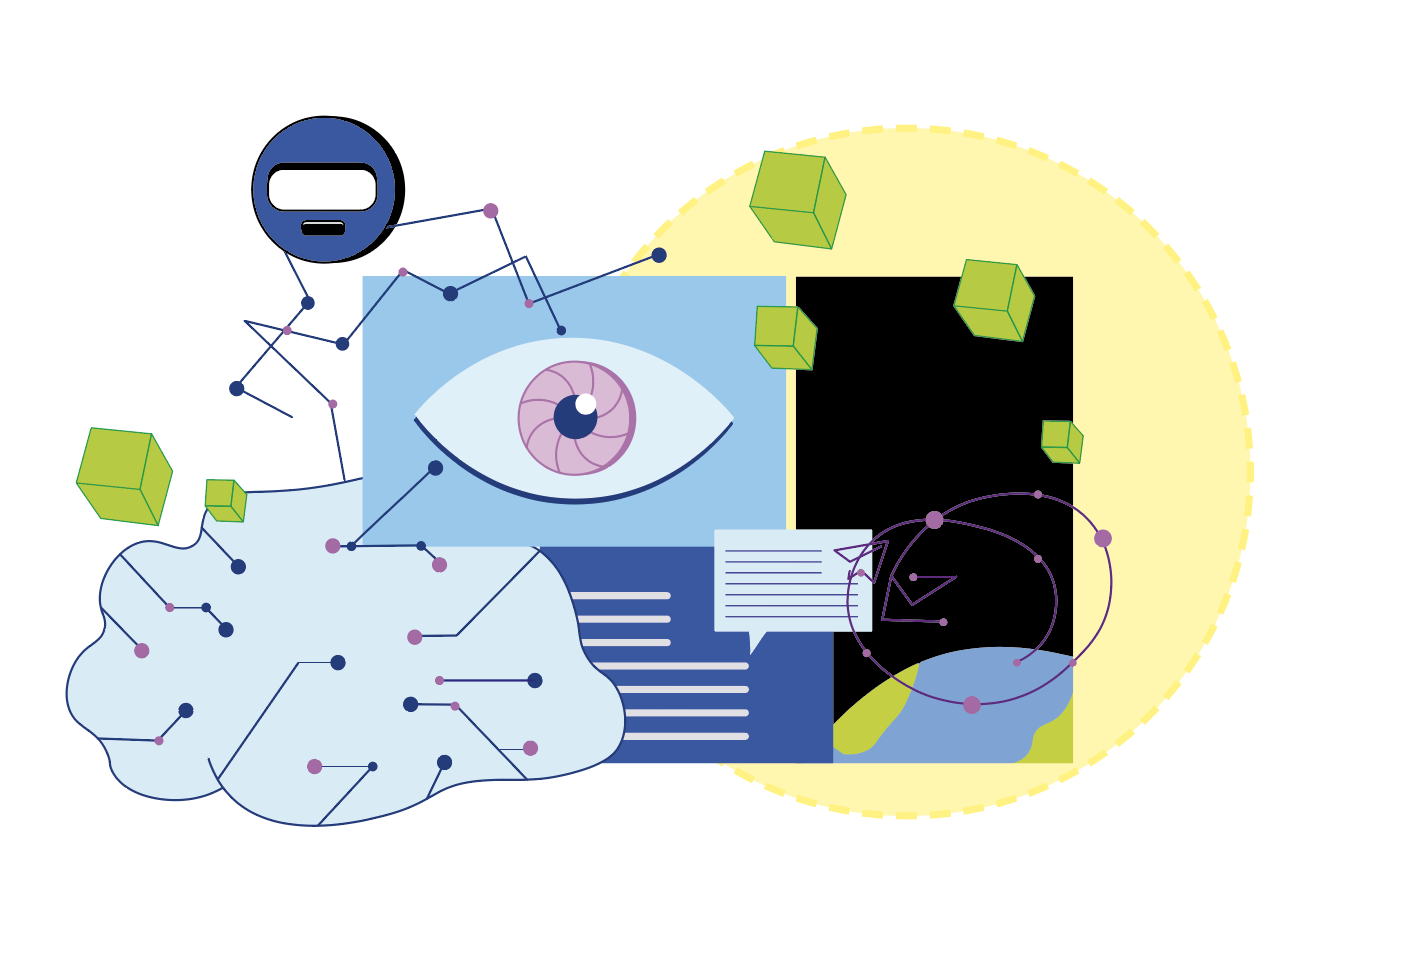 Illustration of a network, an eye, texts and abstract forms